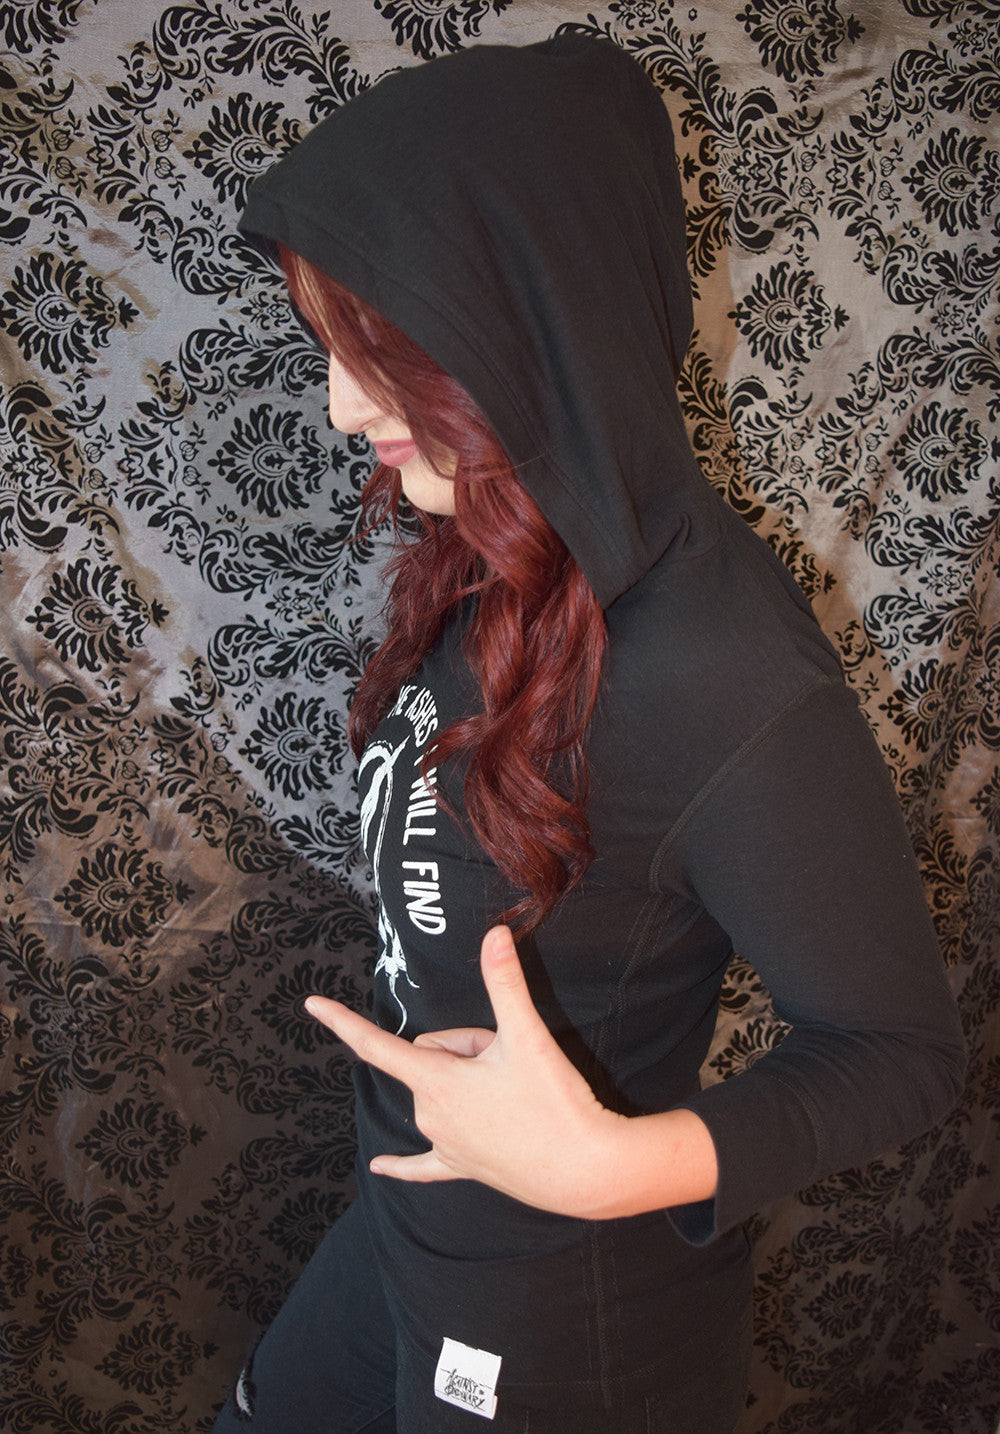 "FROM THE ASHES" Women's Hooded Tee